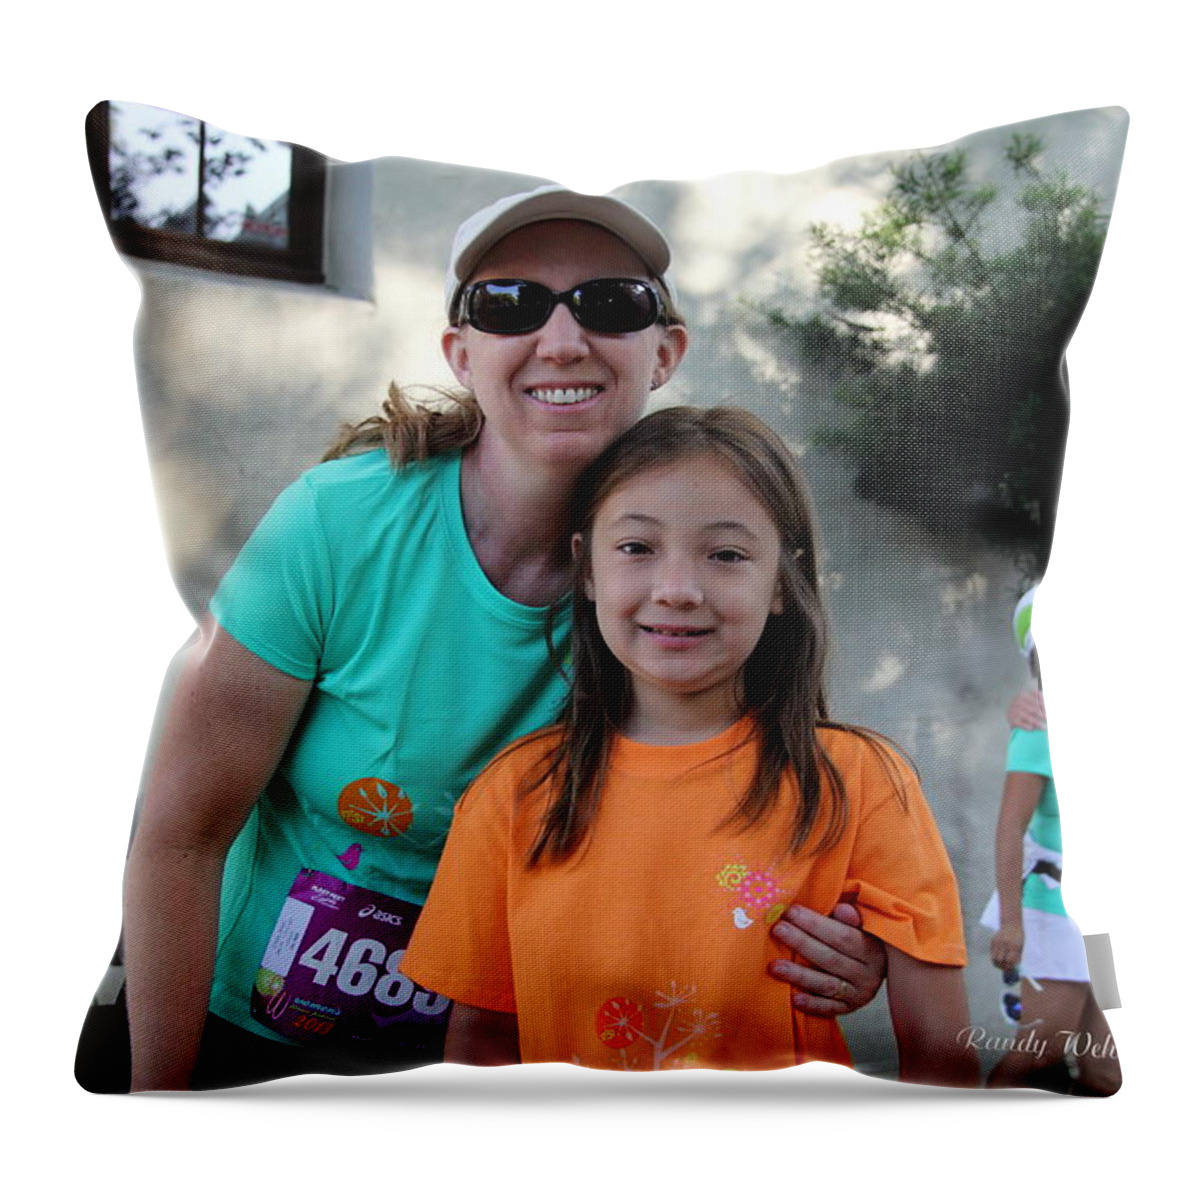 Women's Fitness Festival 2013 Throw Pillow featuring the photograph Sheri and Sami by Randy Wehner